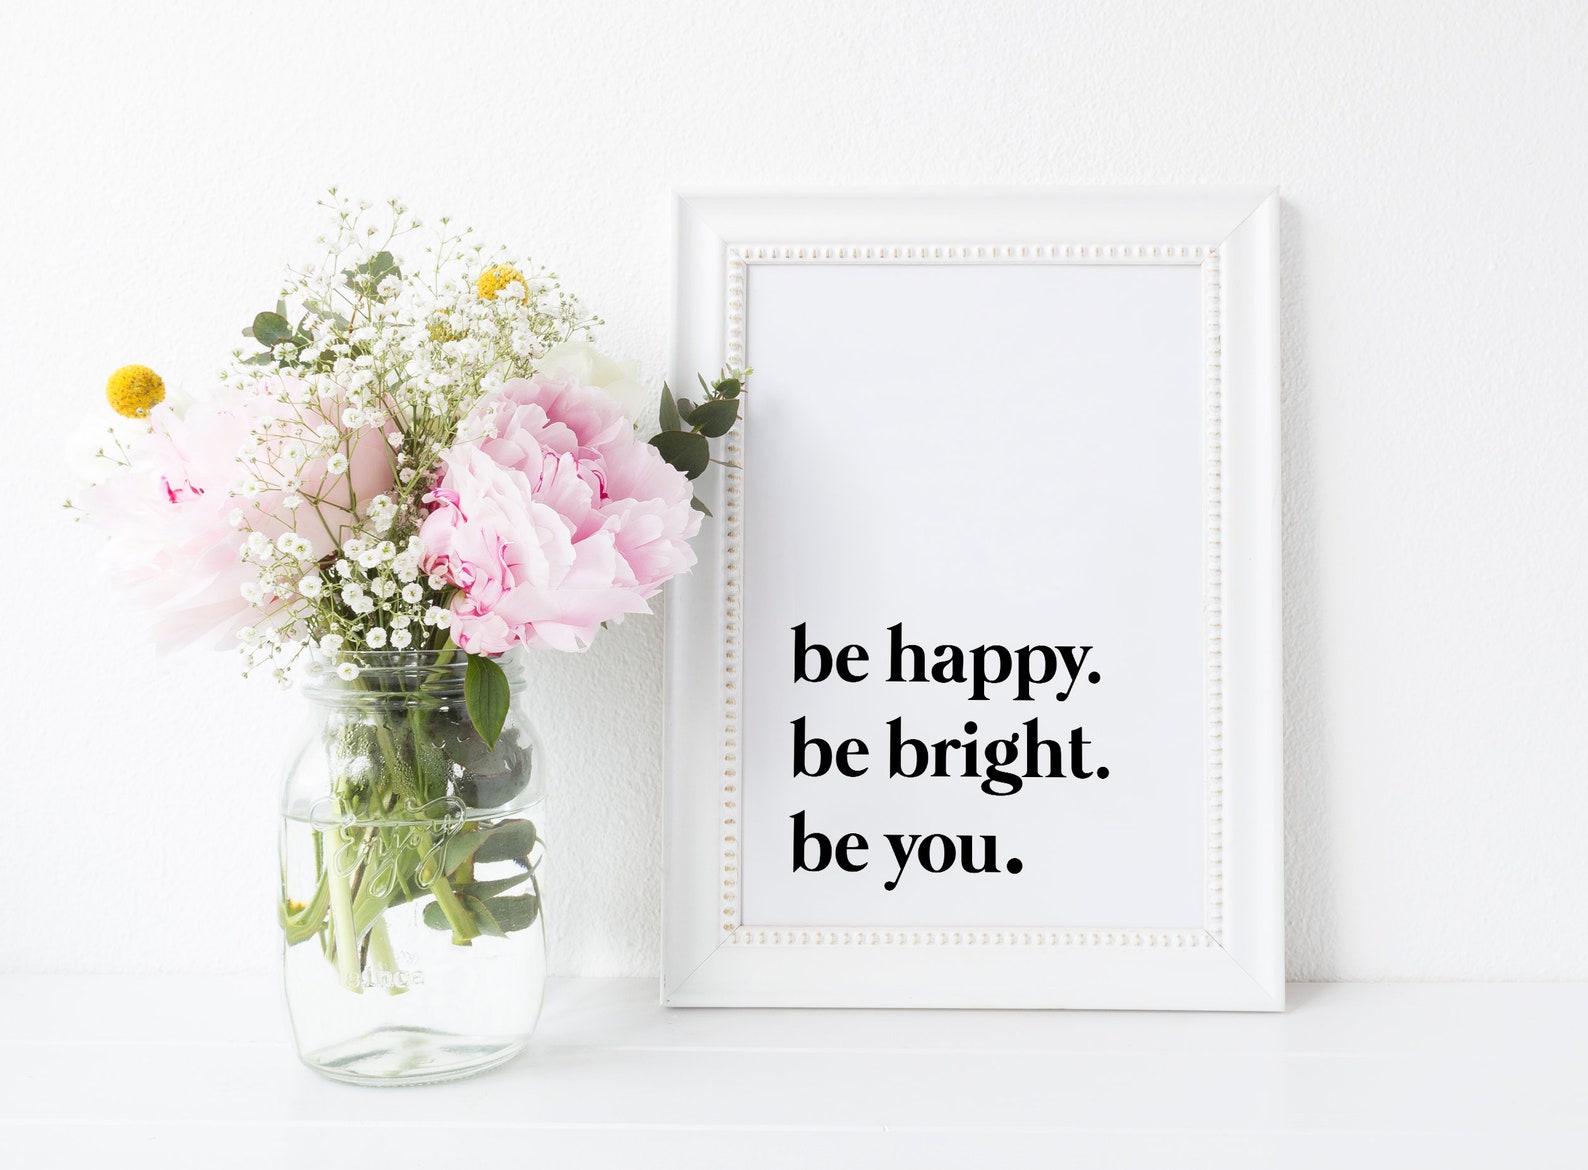 Be Happy be Bright be you.